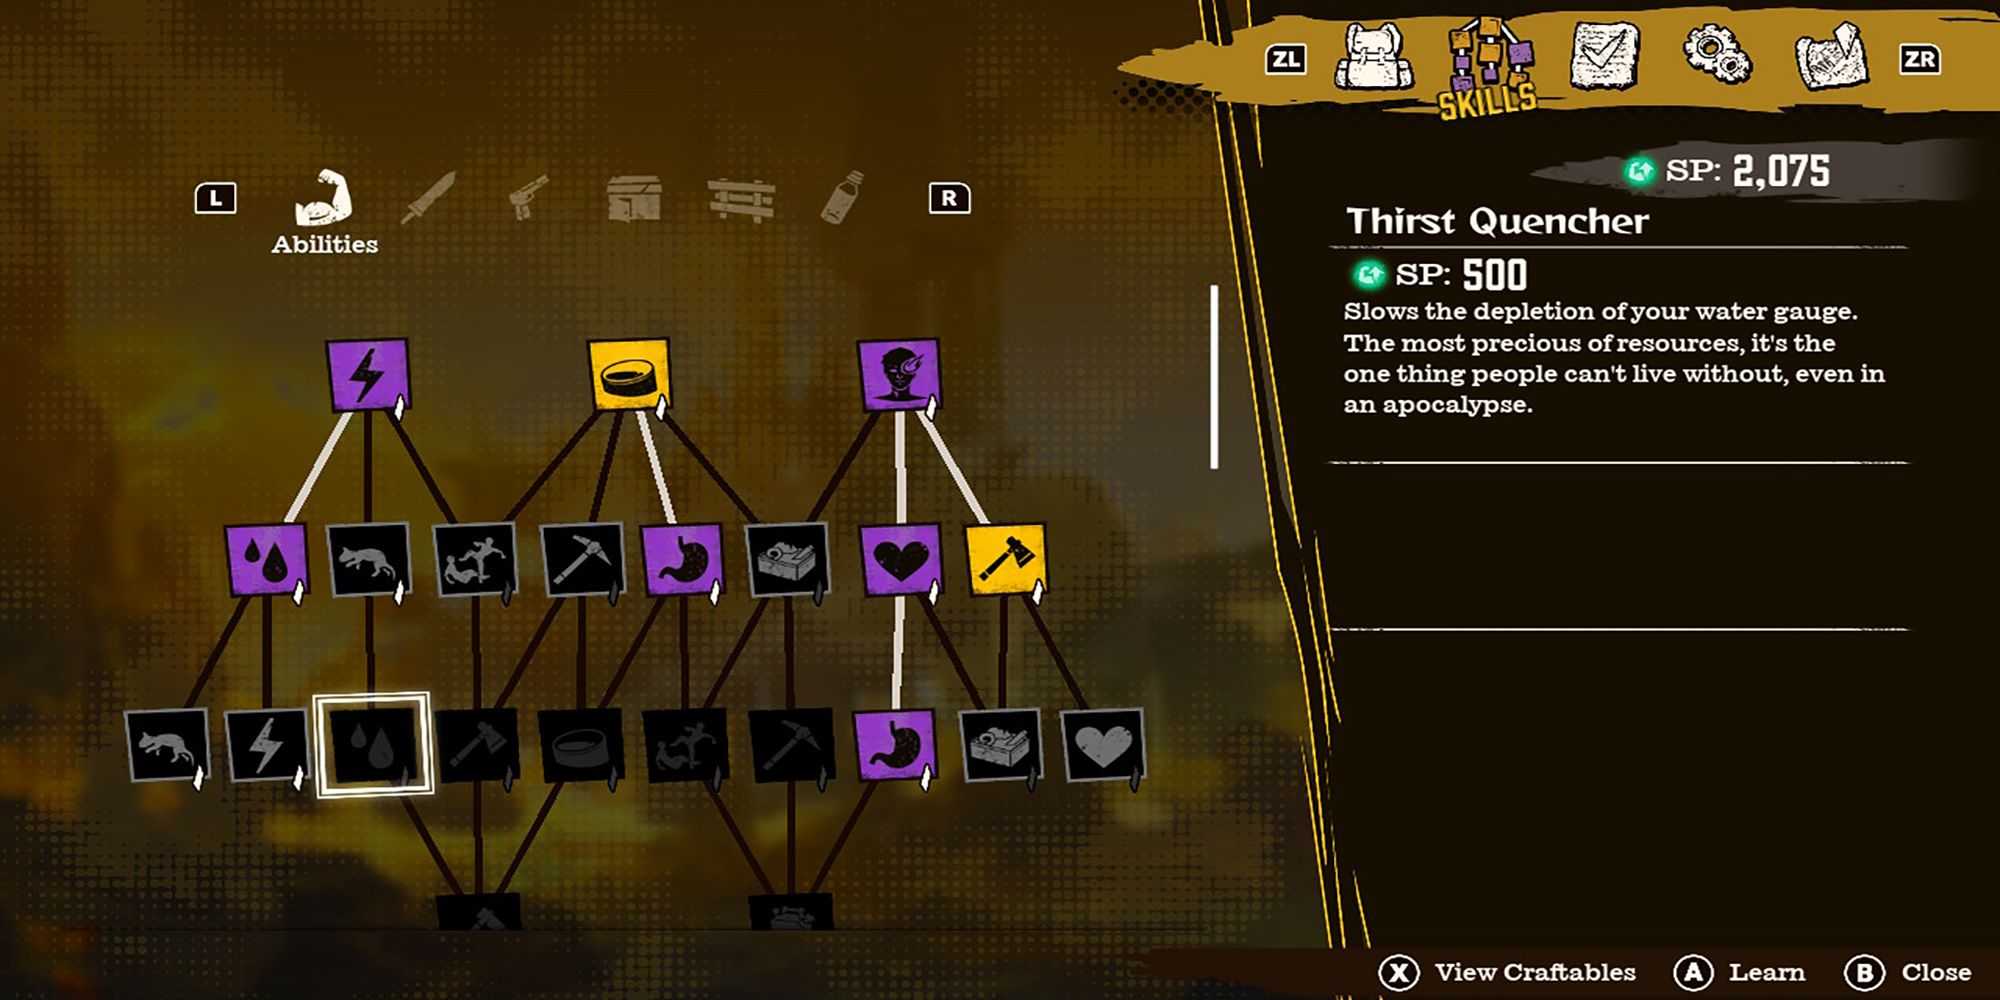 Thirst Quencher is highlighted among an abundance of abilities in one of Deadcraft's Skill trees.